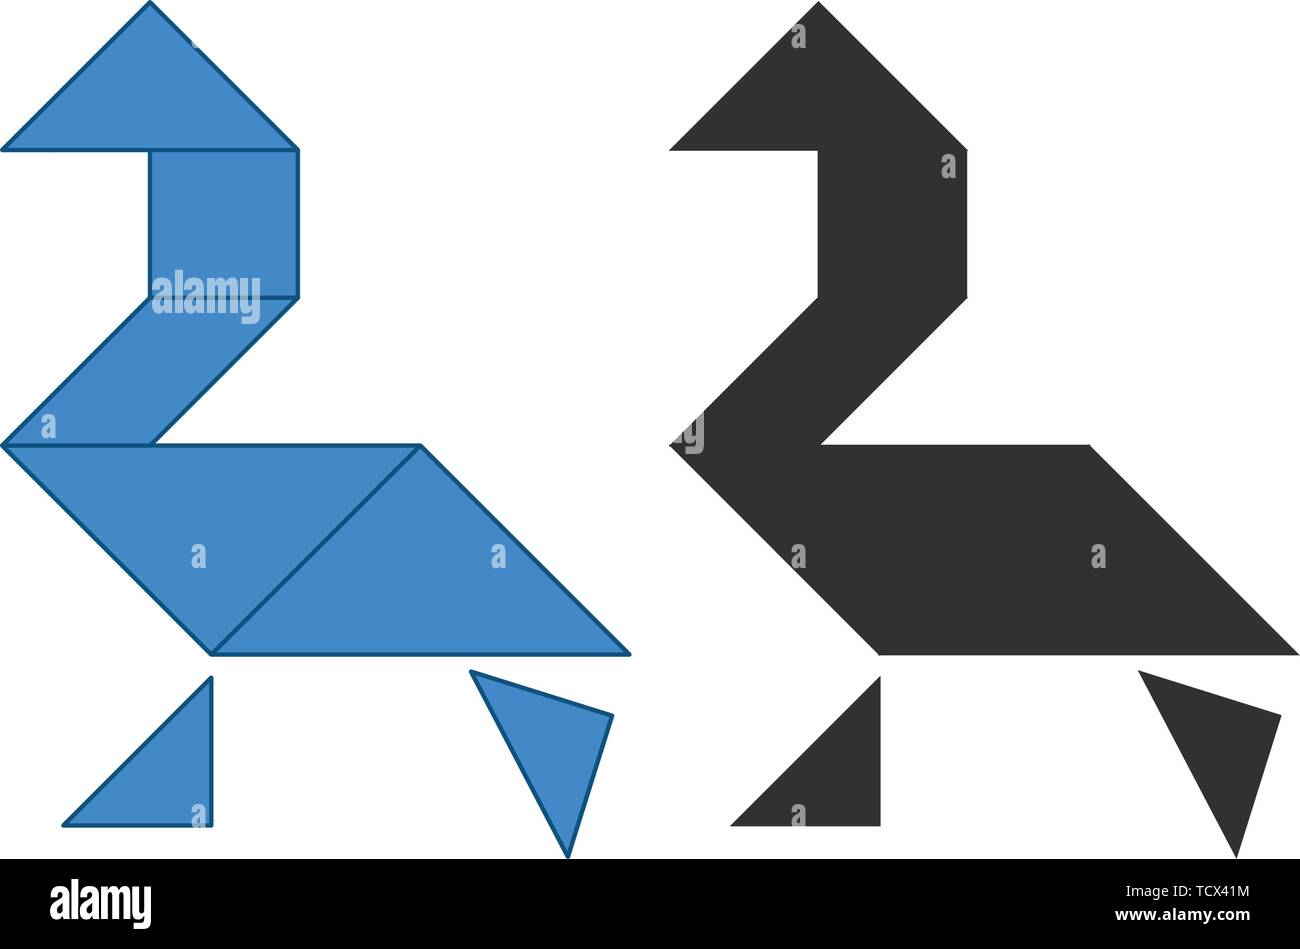 Swan Tangram. Traditional Chinese dissection puzzle, seven tiling pieces - geometric shapes: triangles, square rhombus , parallelogram. Board game for Stock Vector